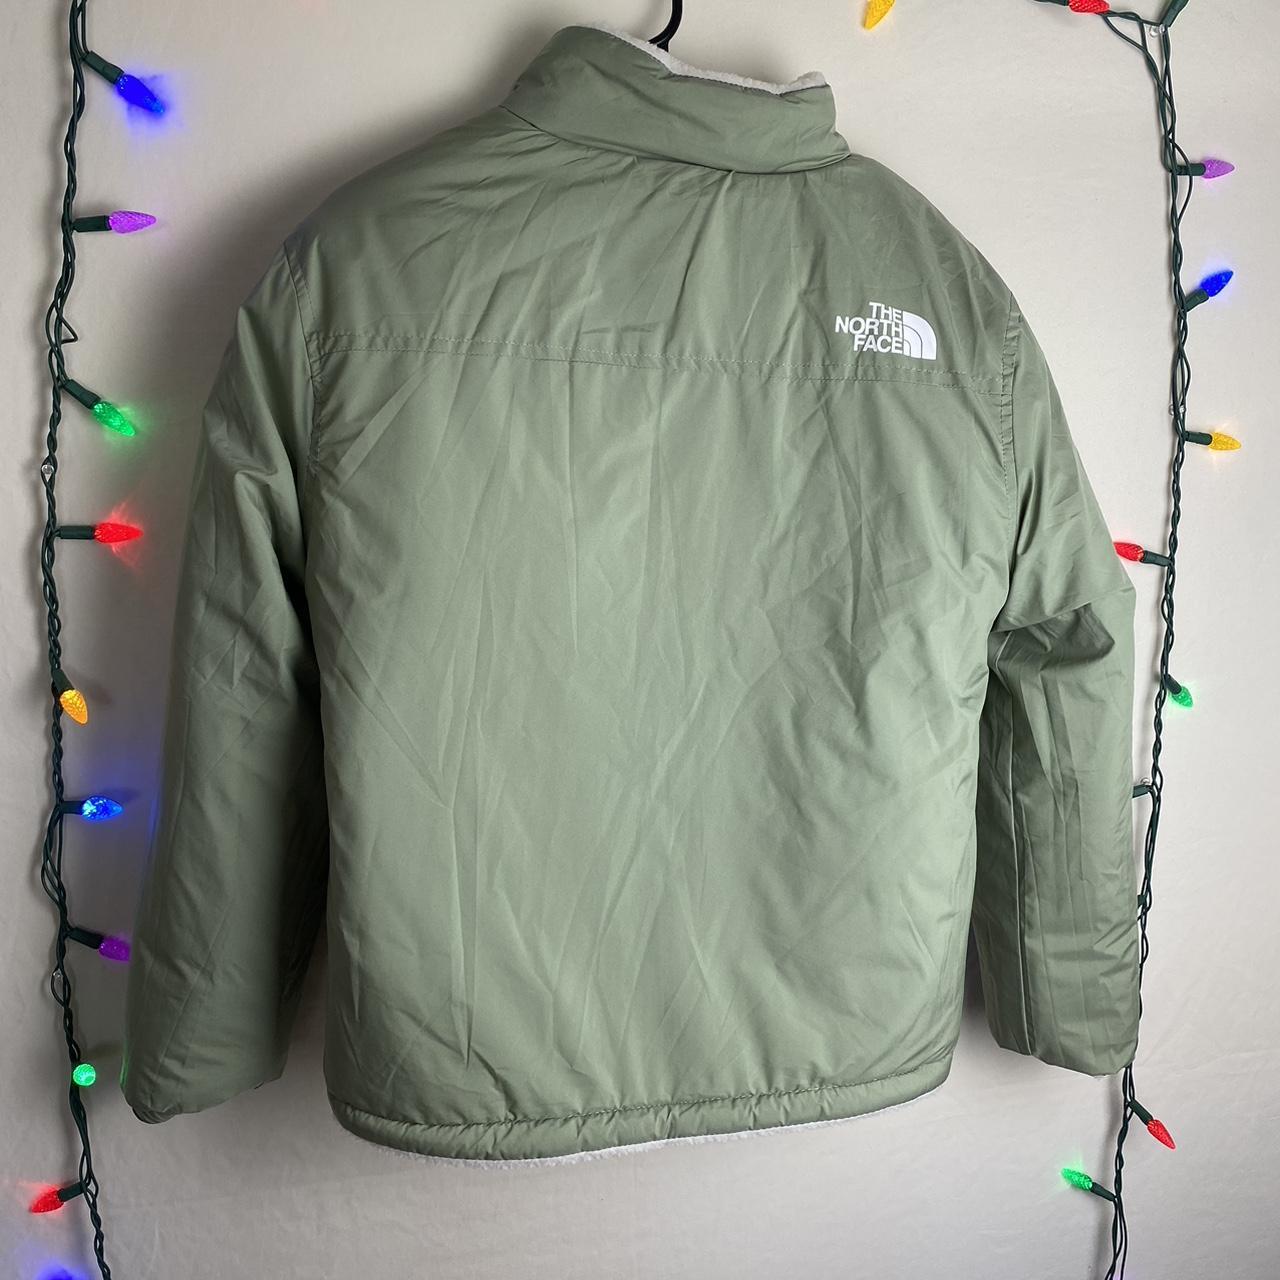 The North Face Women's White and Green Jacket (6)